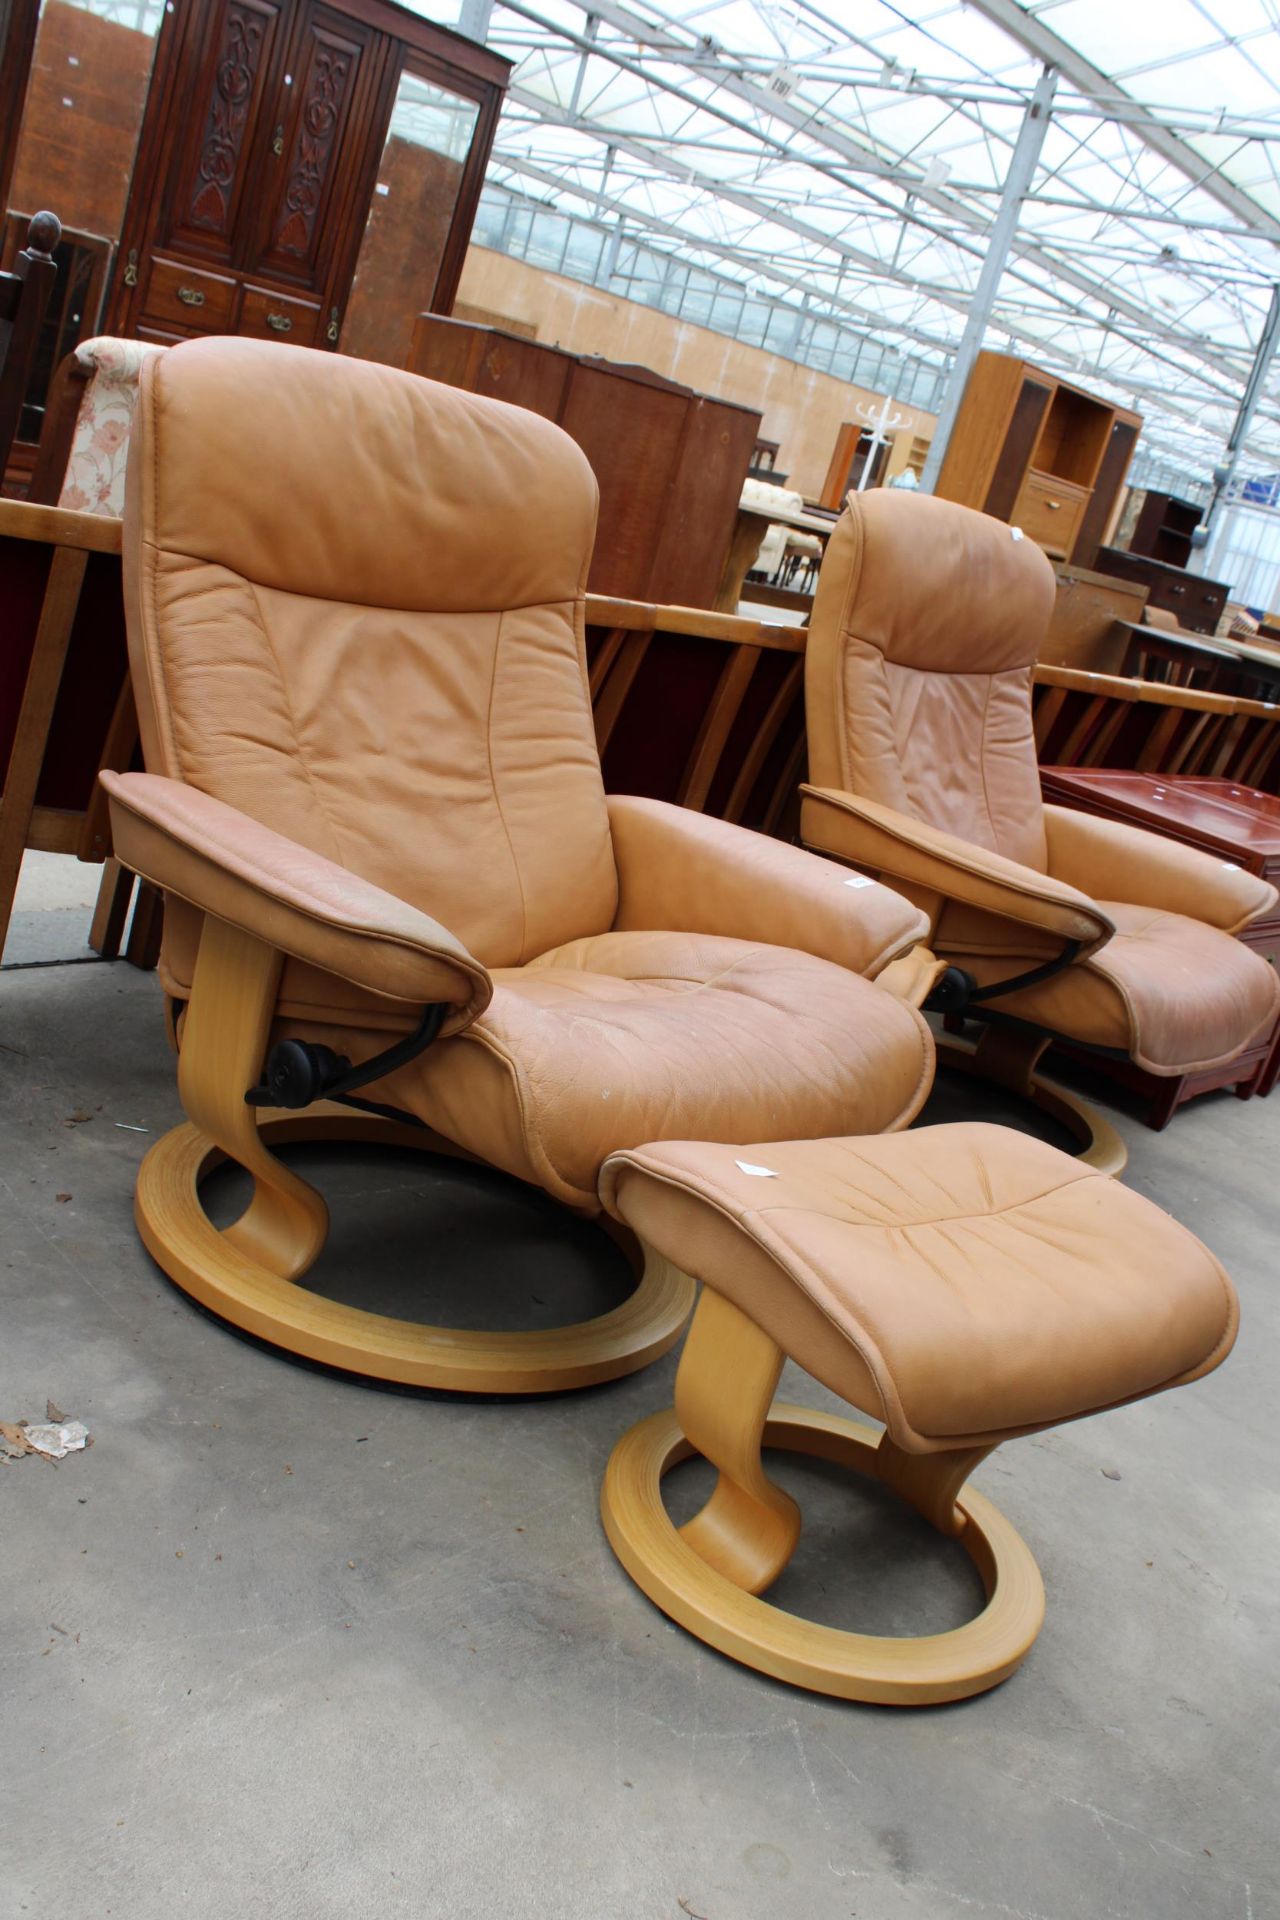 A STRESSLESS EKORNES TANNED LEATHER SWIVEL RECLINER WITH STOOL - Image 4 of 4